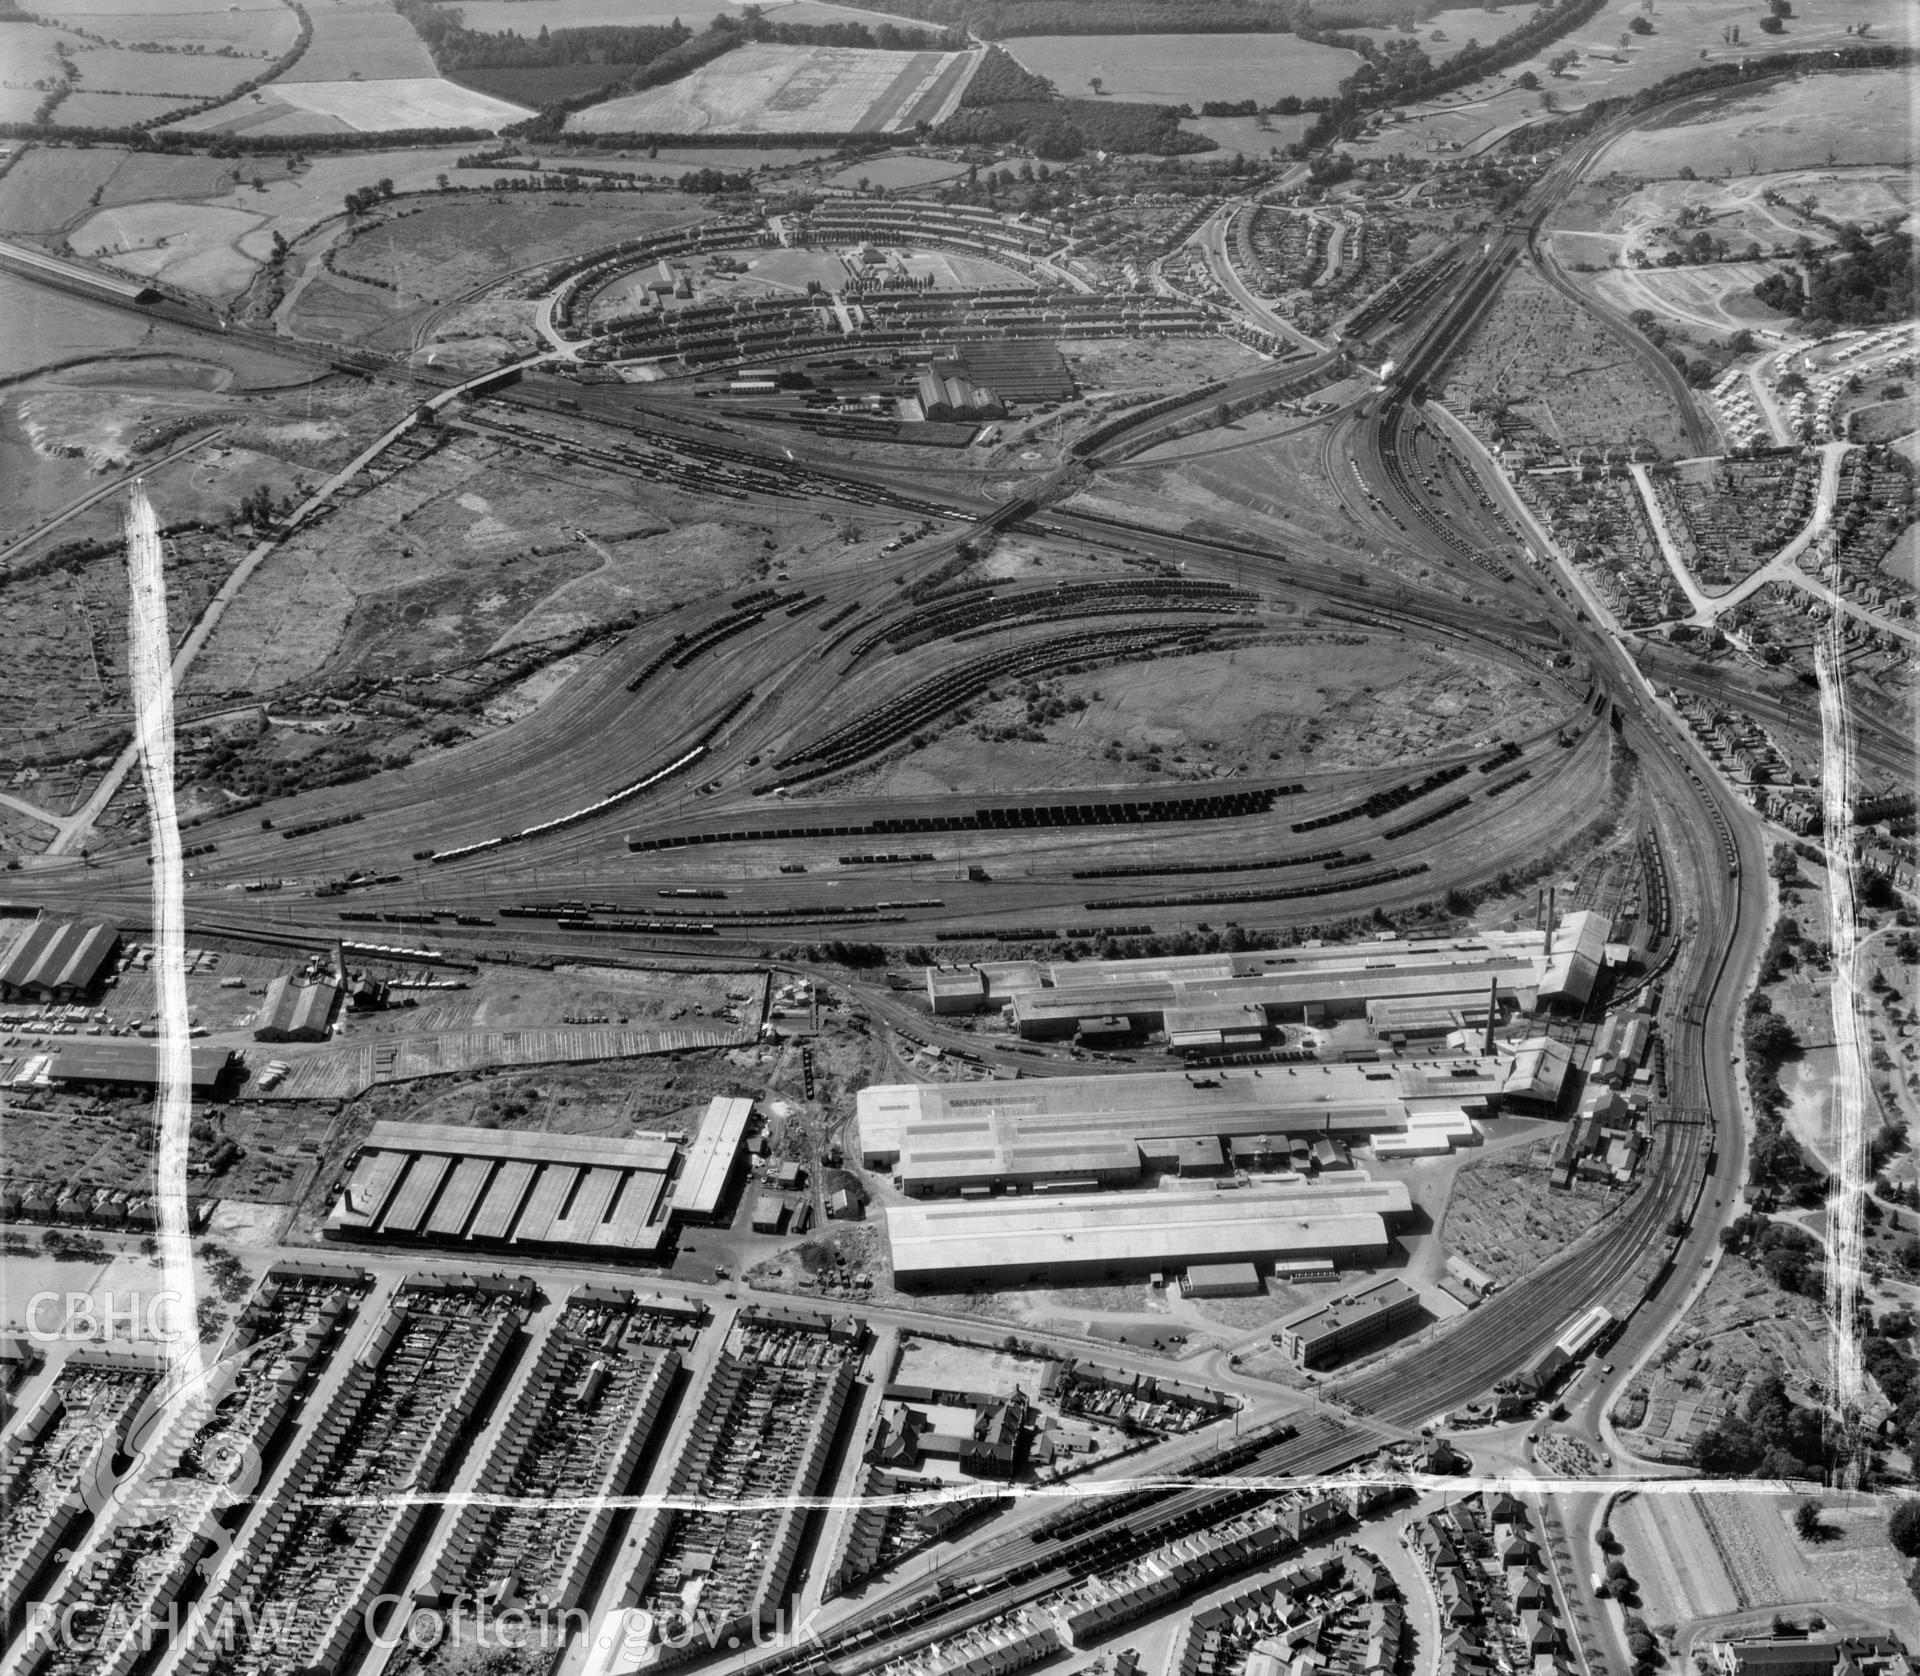 View of Newport showing Whitehead steelworks